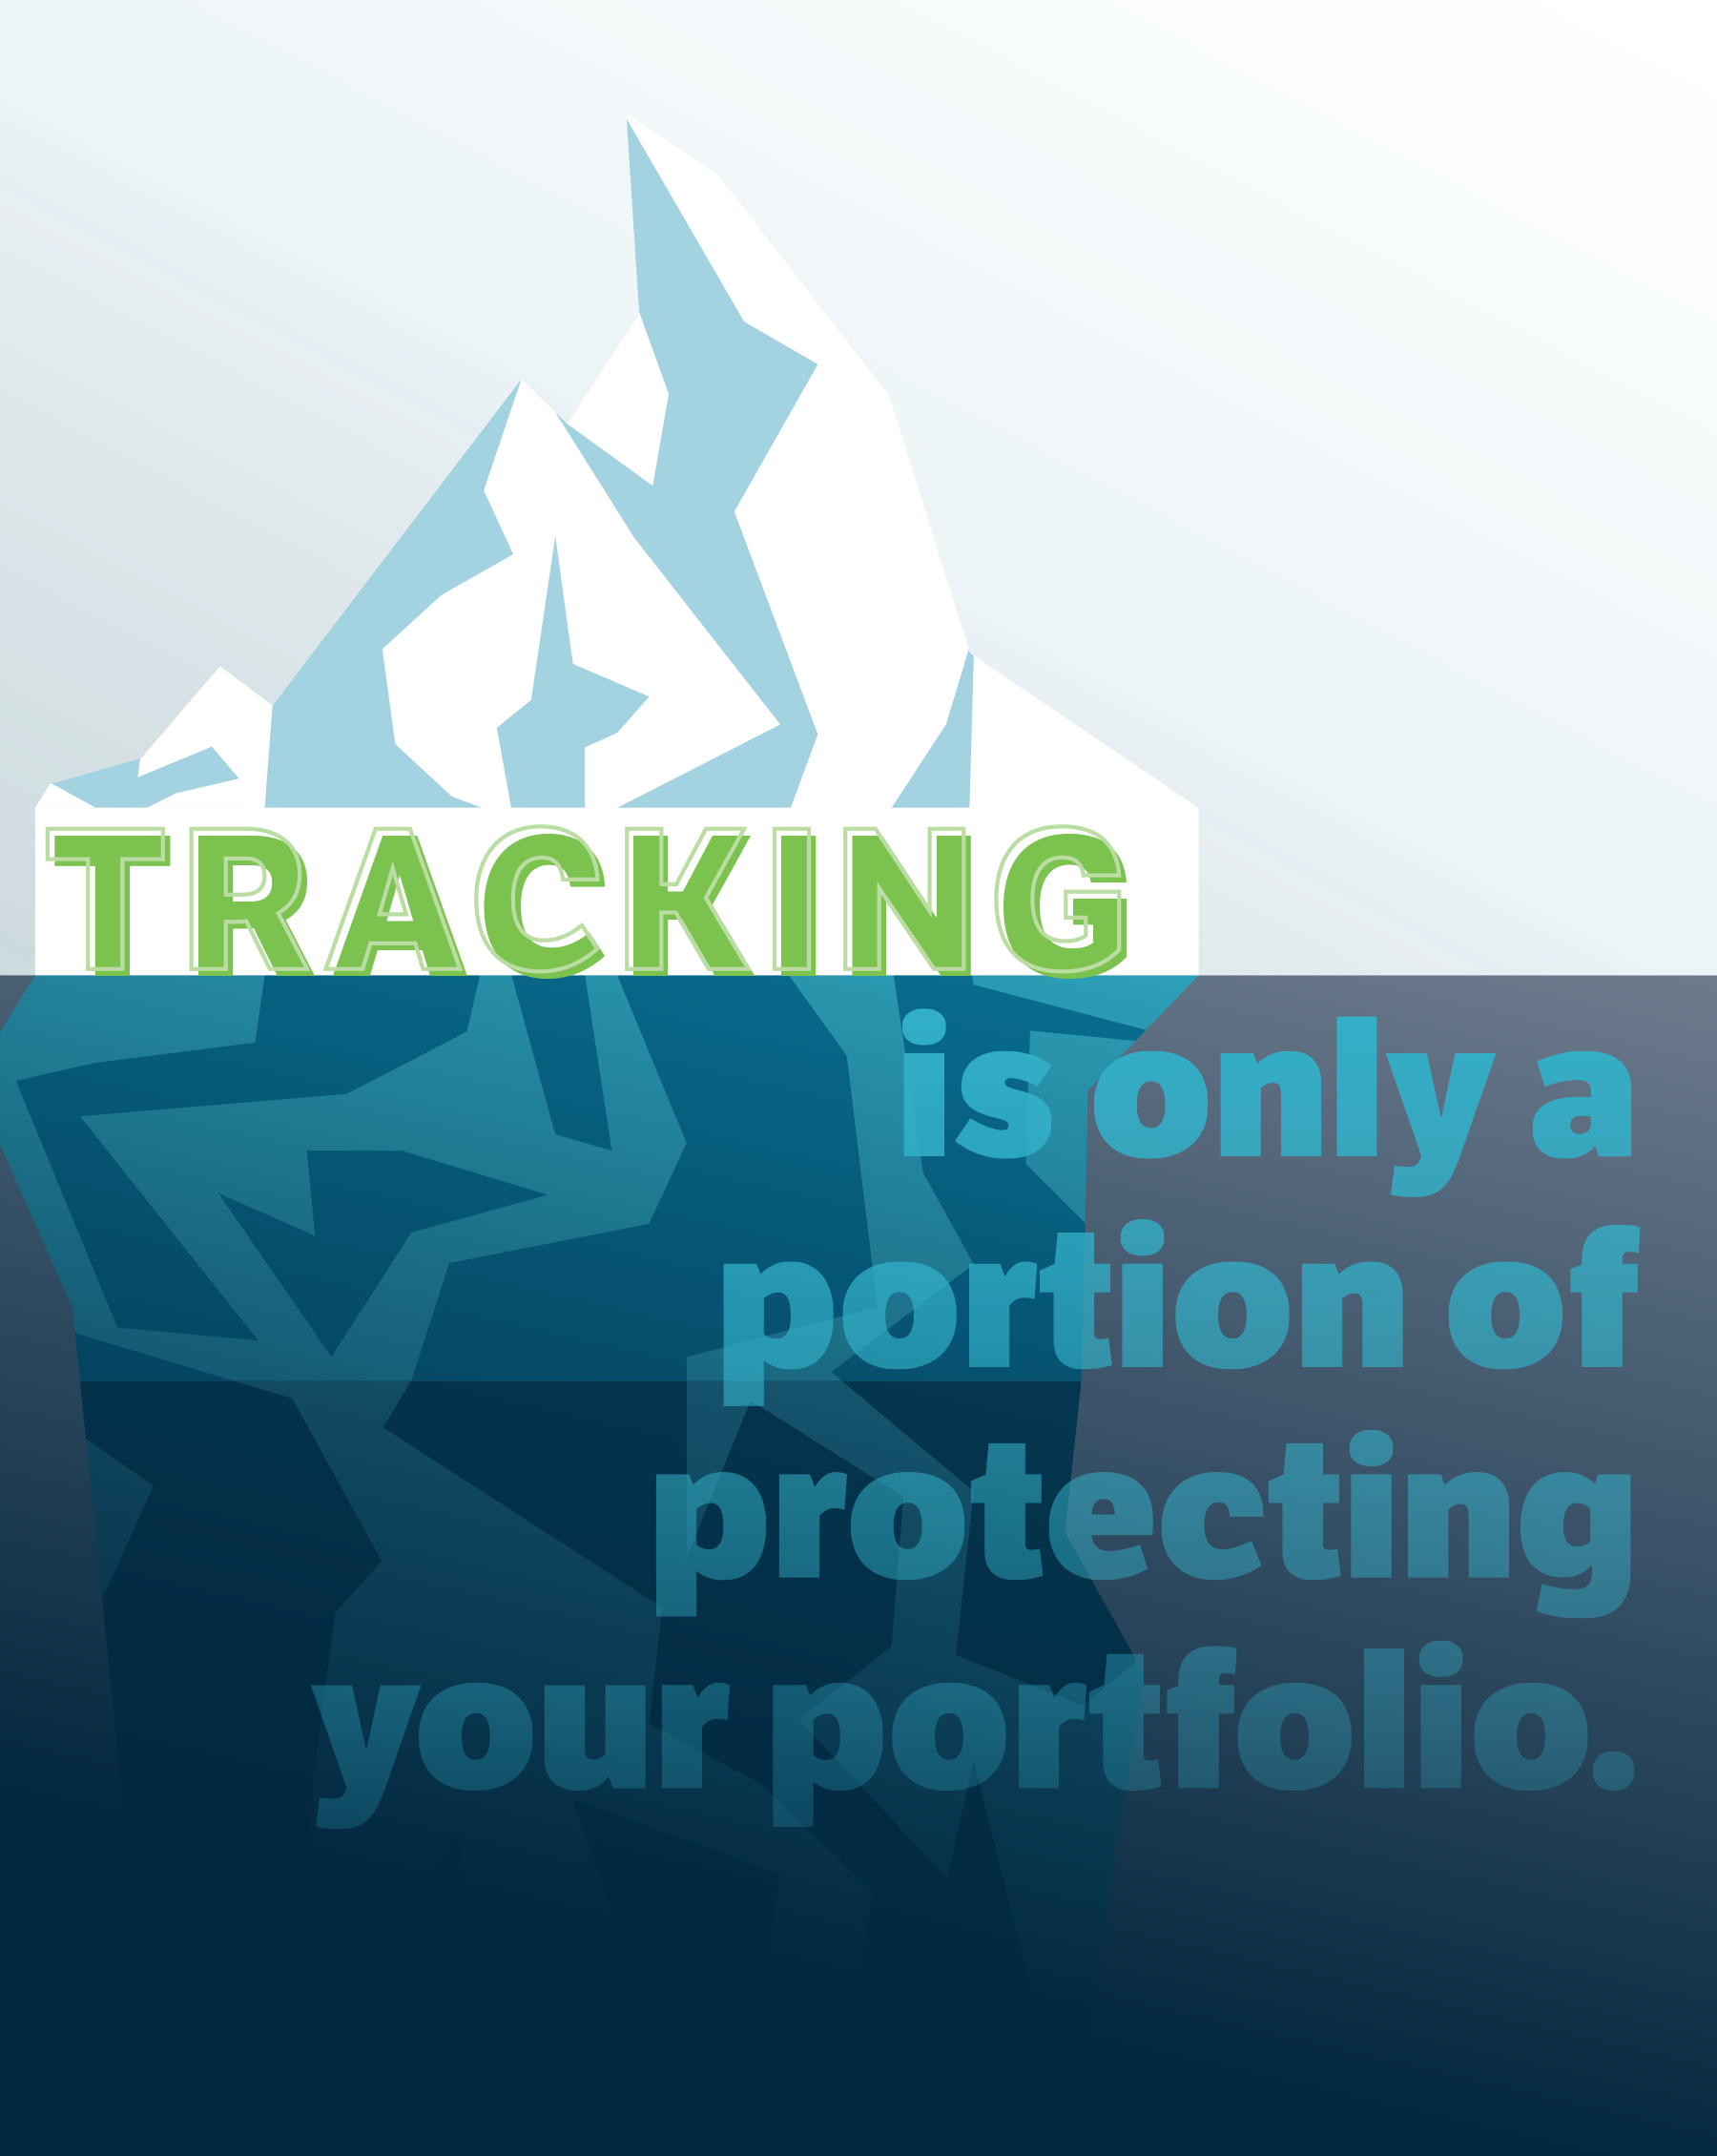 Tracking is only a portion of protecting your portfolio.